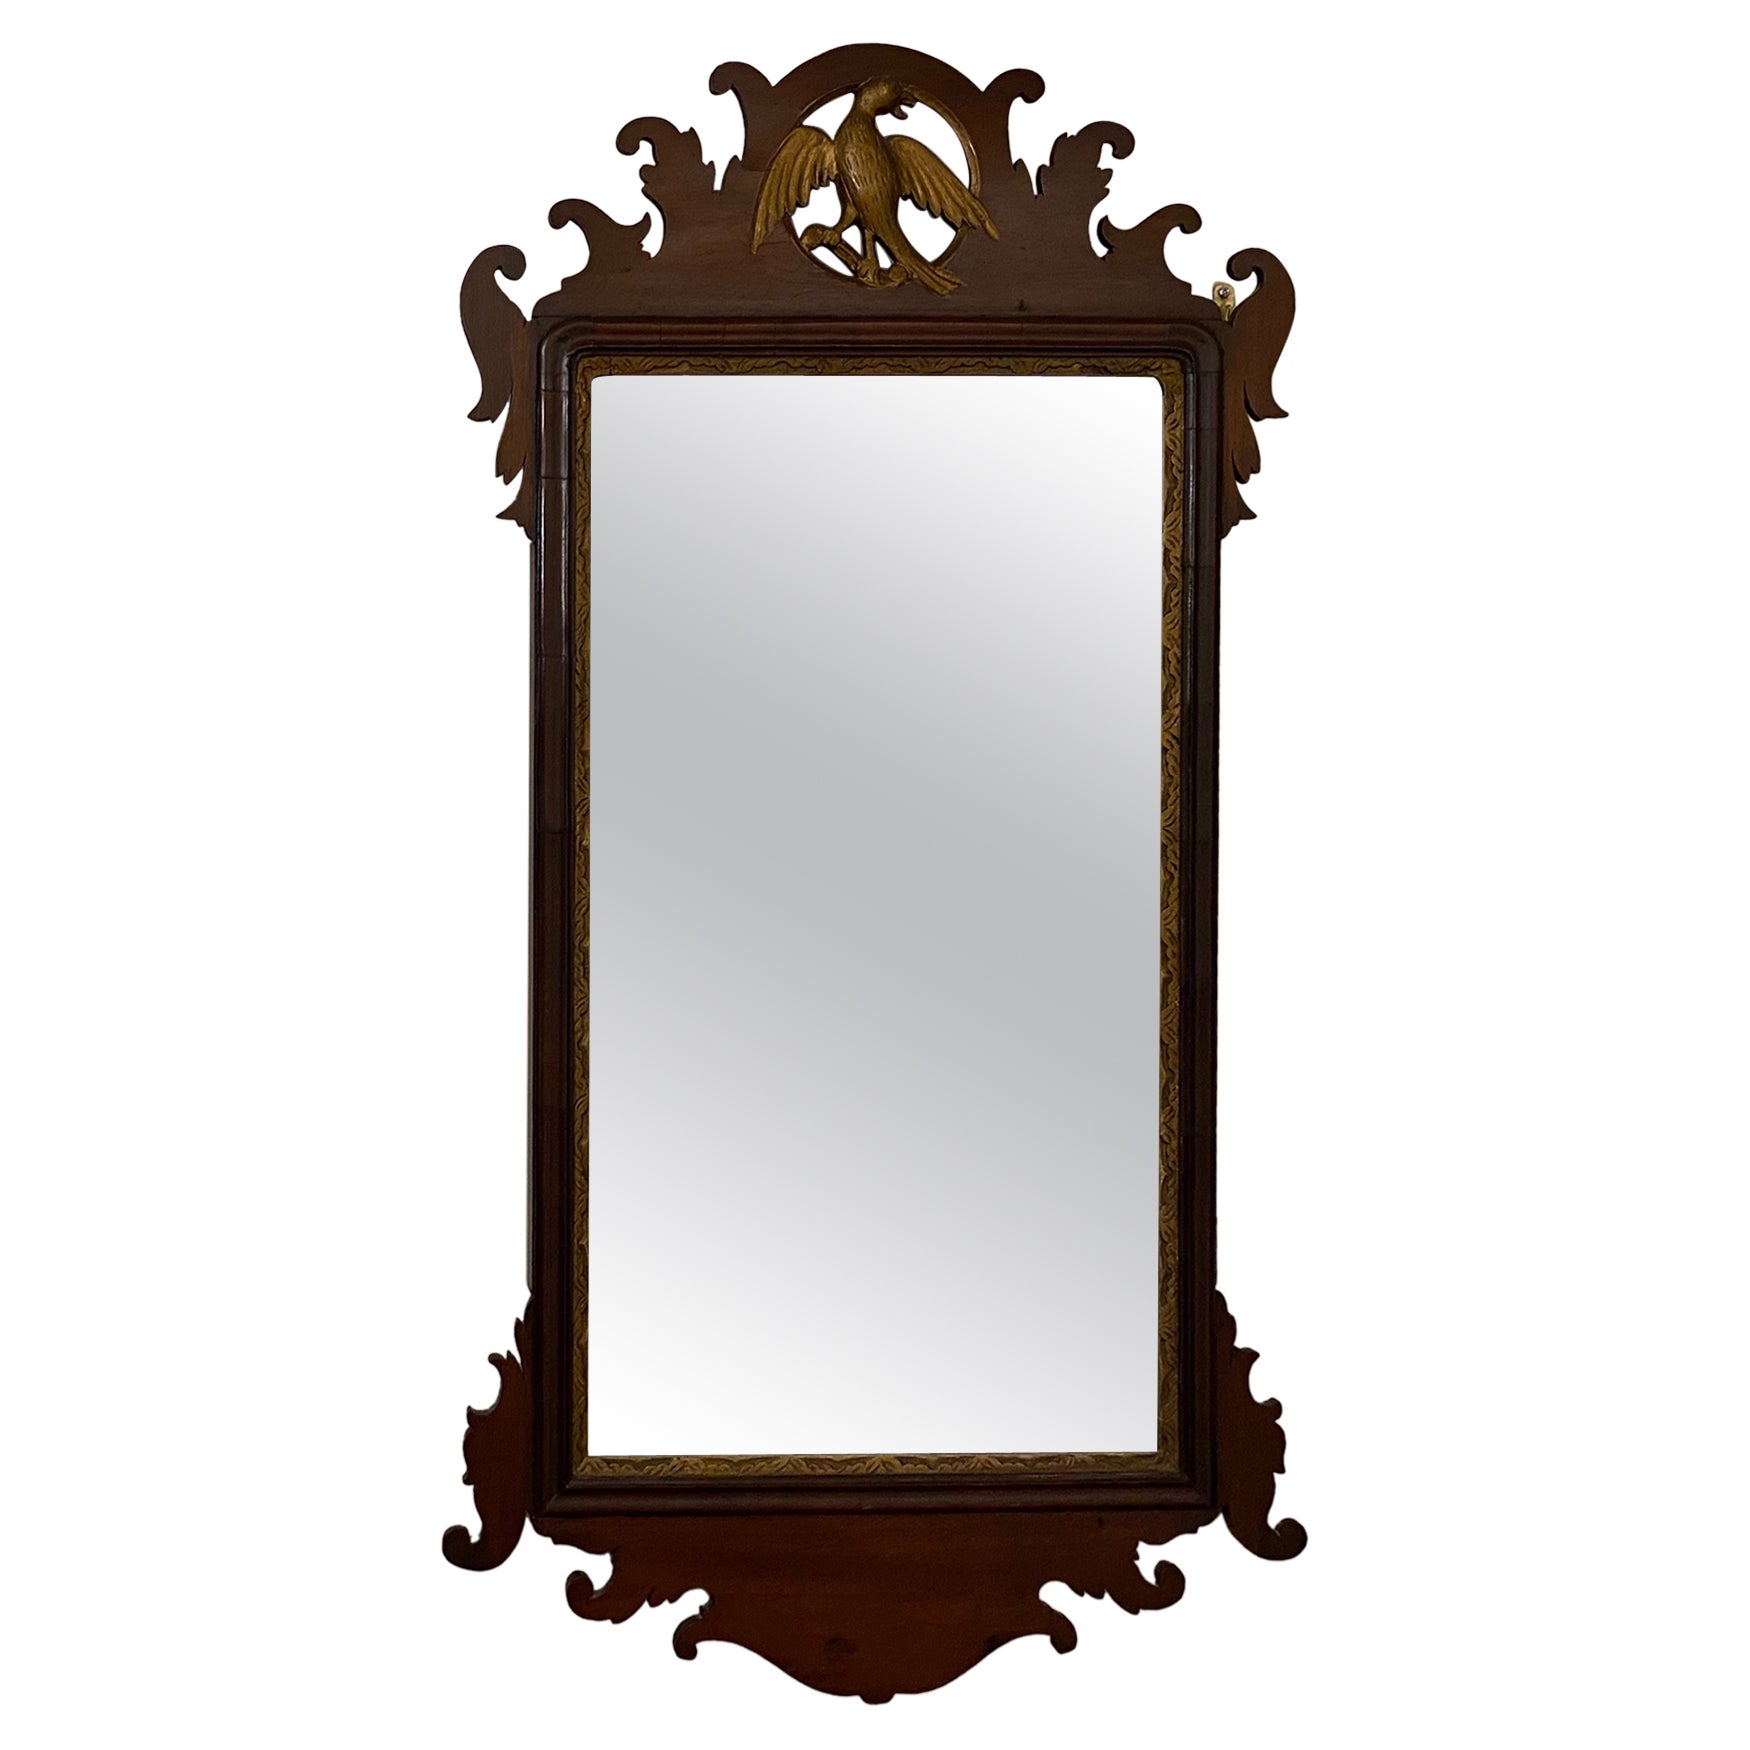 18th Century Early American Chippendale Style Wall Mirror with Eagle Pediment